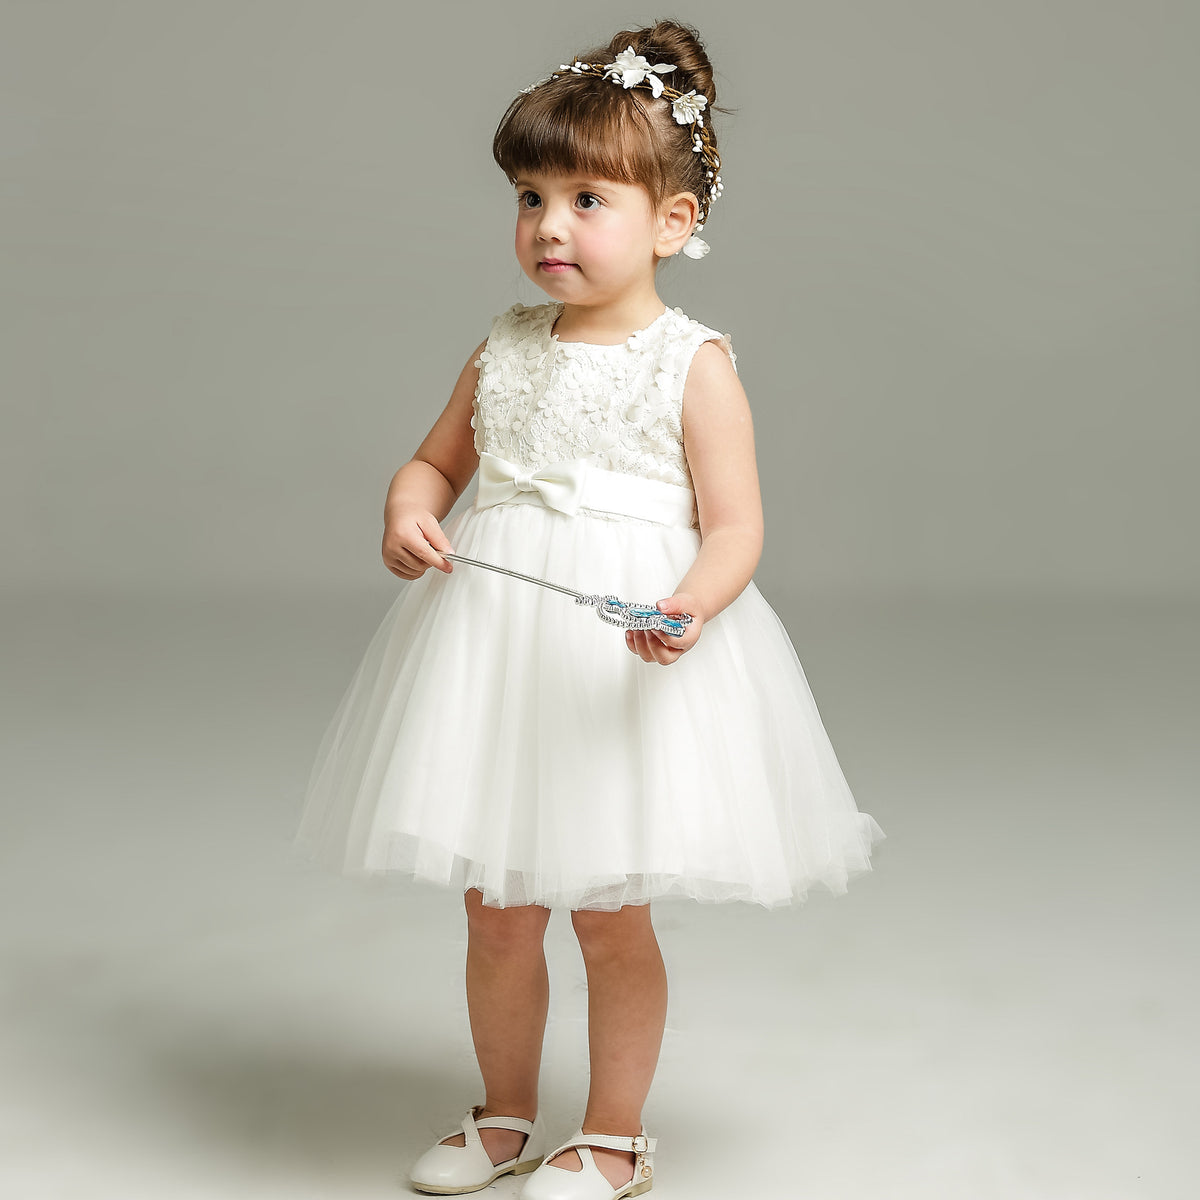 Cute Knee Length Girl Dresses with Bow Baby's A Line Flower Girl Dress